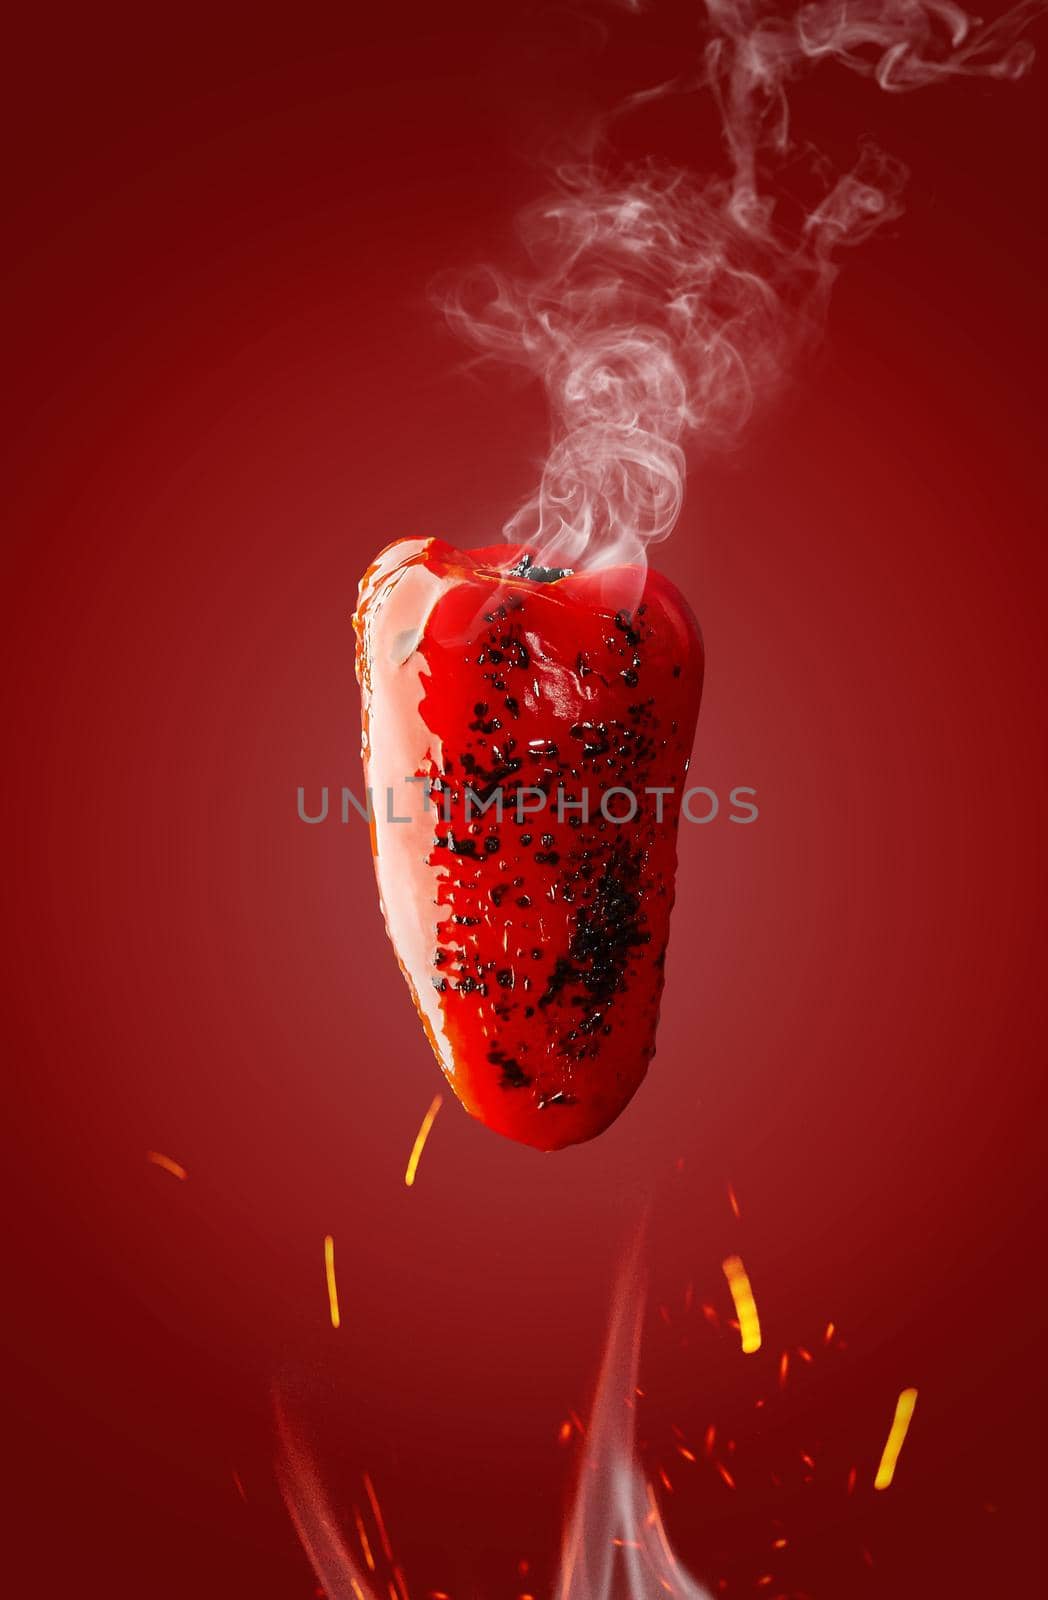 Grilled pepper hovering over flames with sparks on red background by nazarovsergey